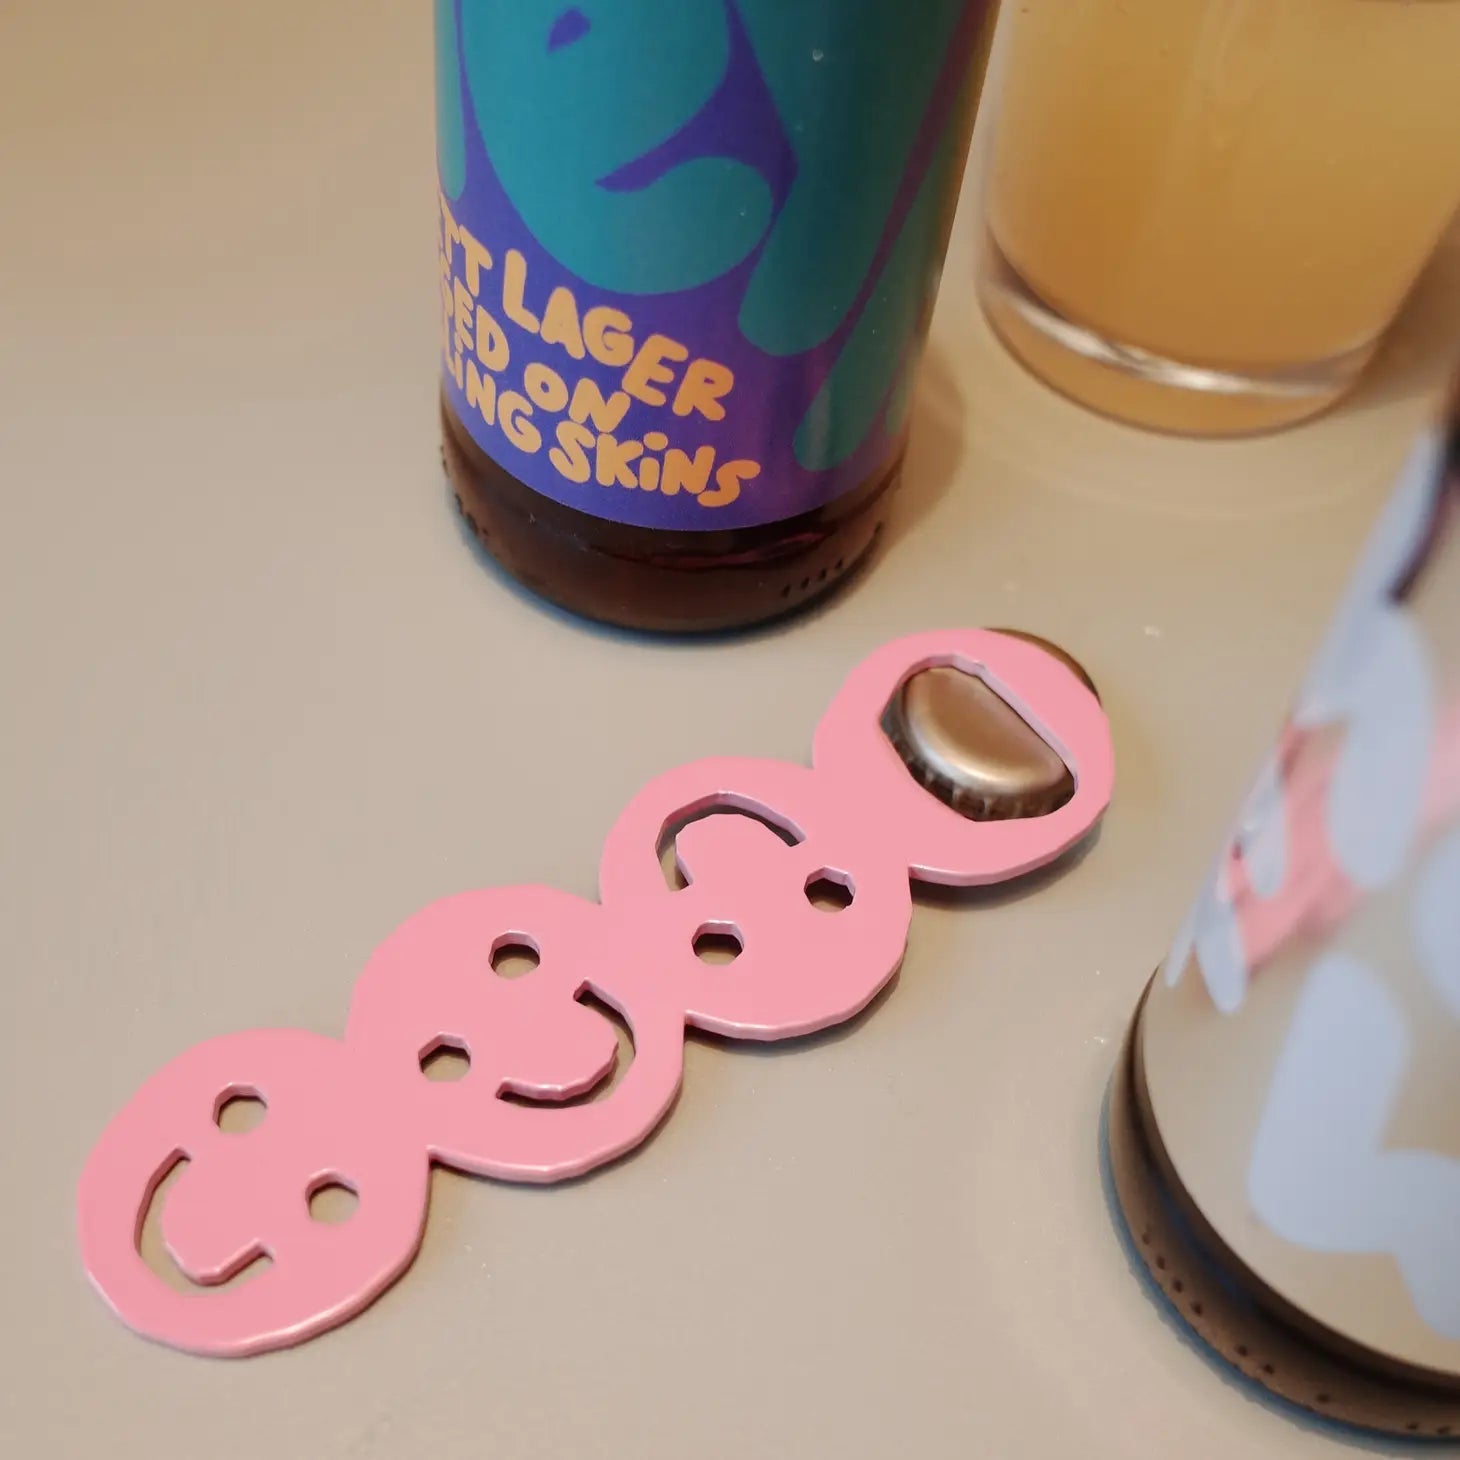 We Are Out of Office - Multiple Color Cheersie Bottle Opener - Ensemble Studios